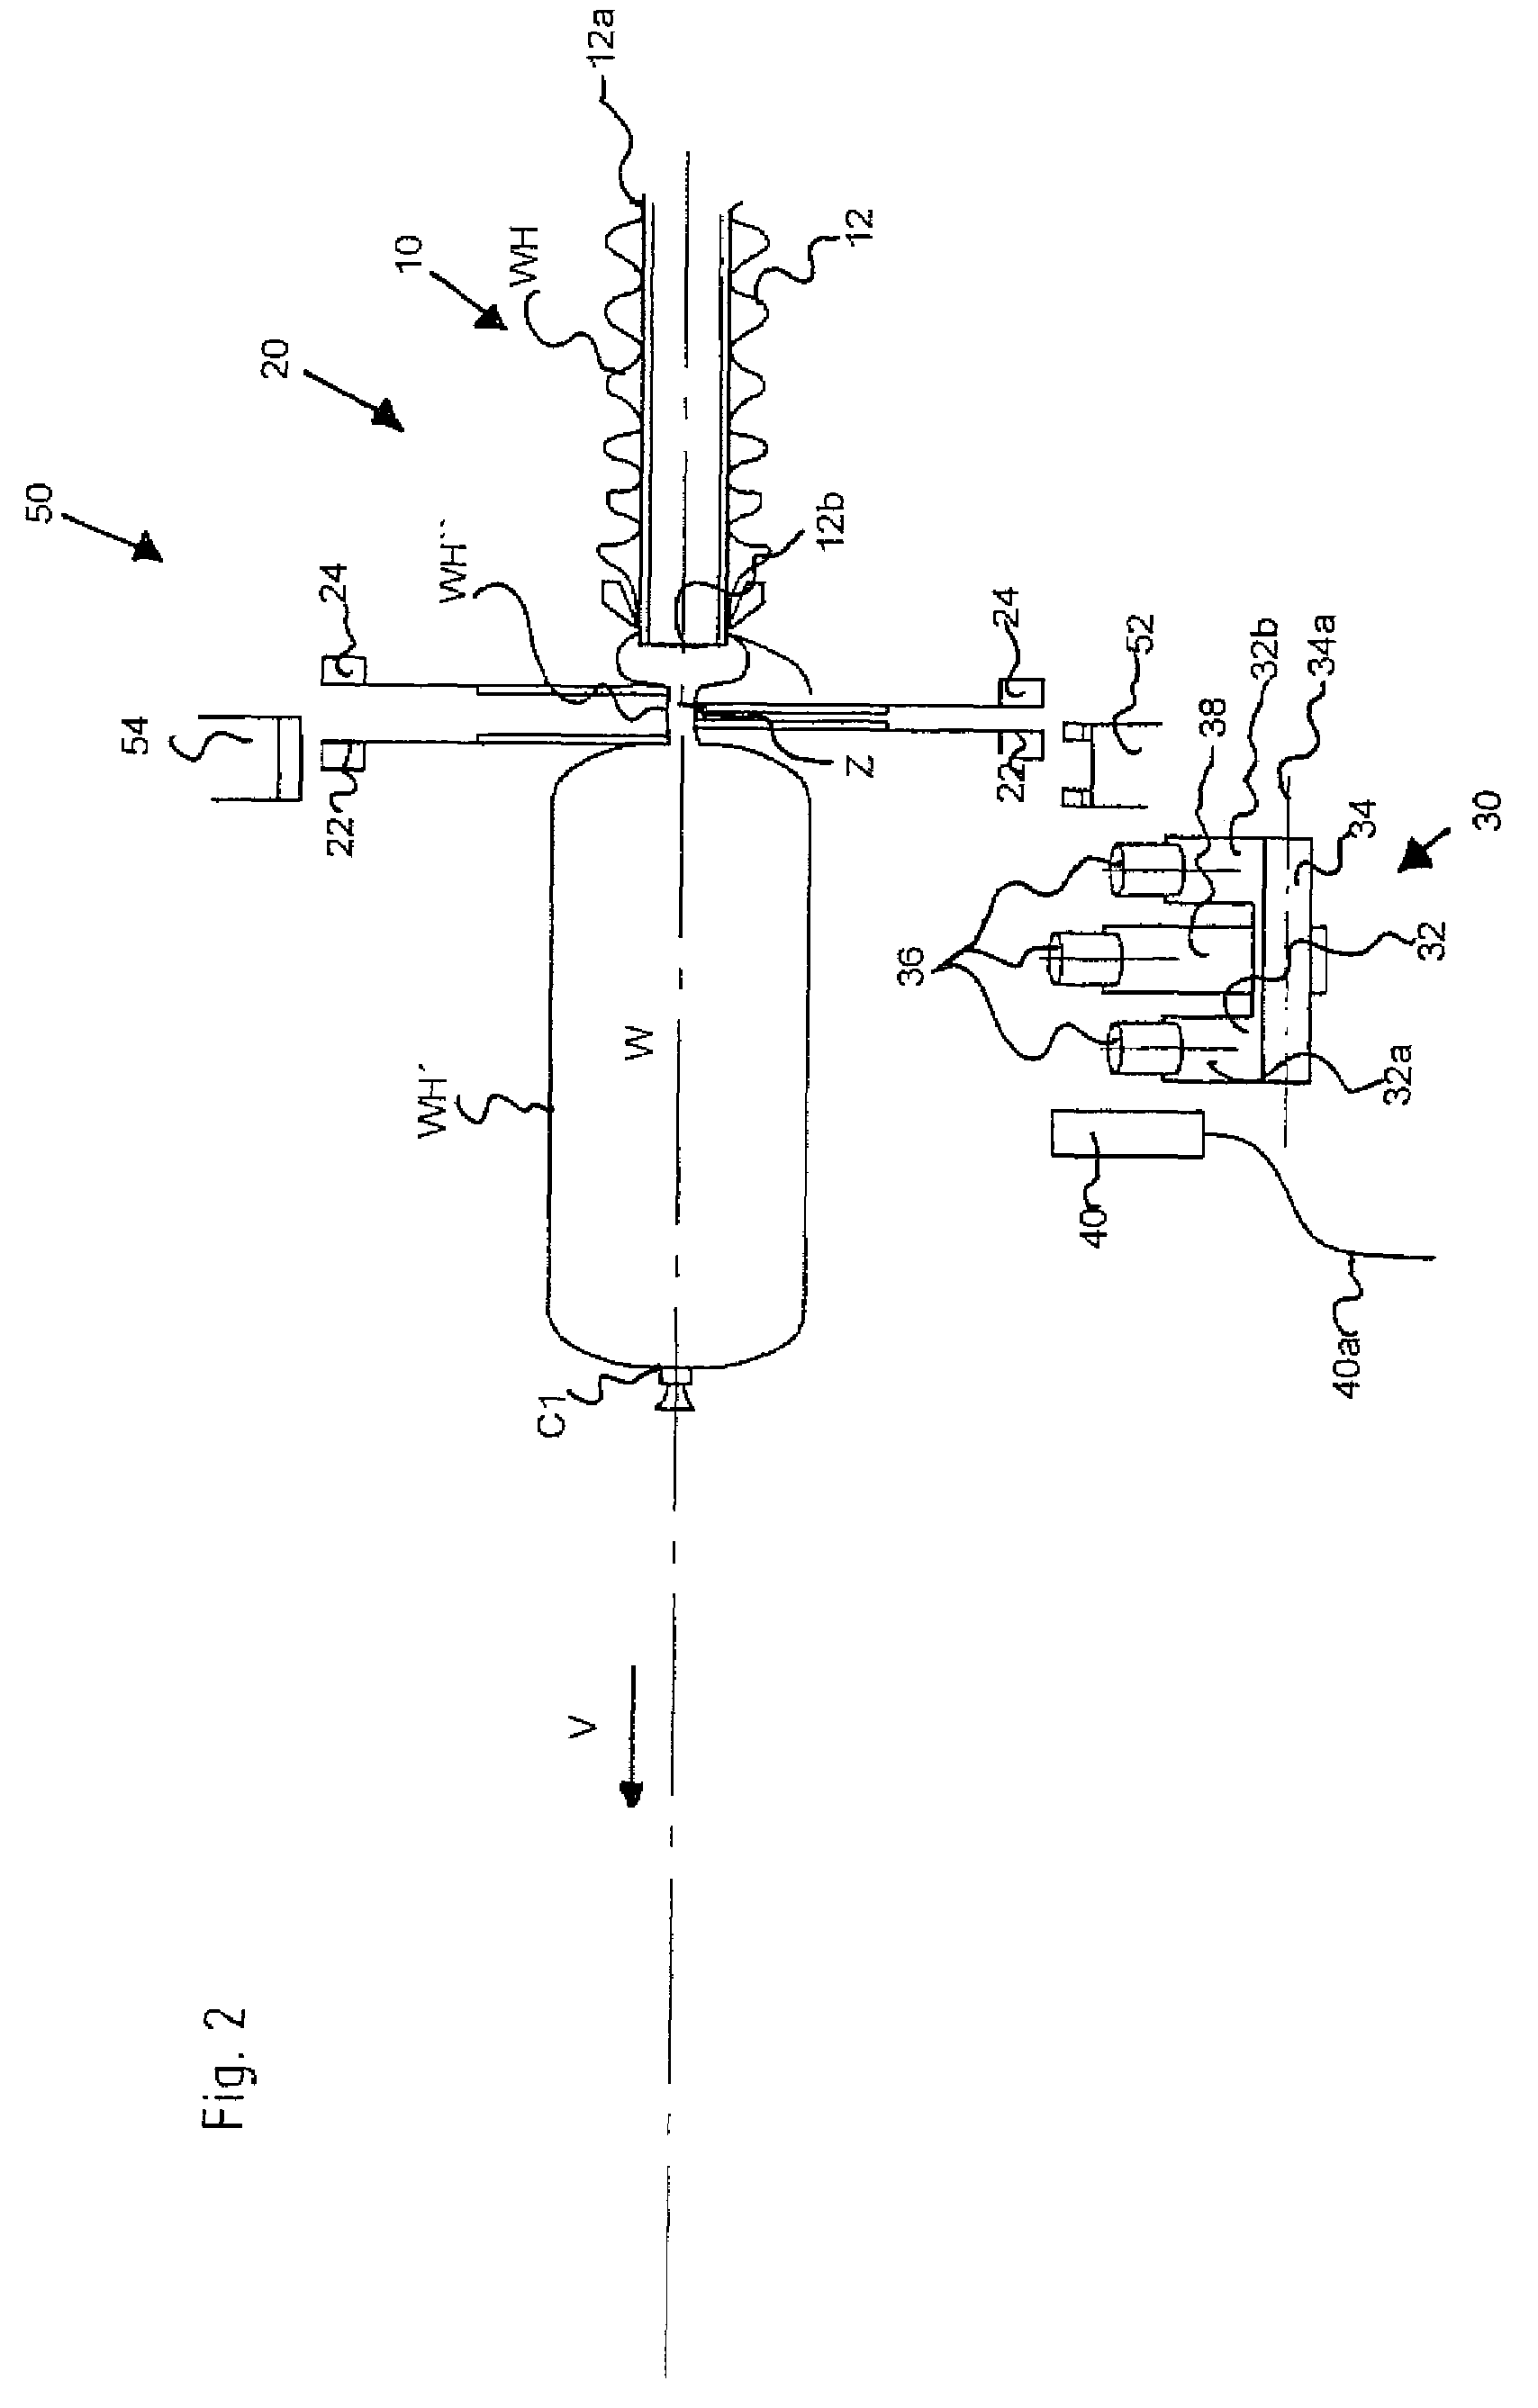 Device for providing a second tail length